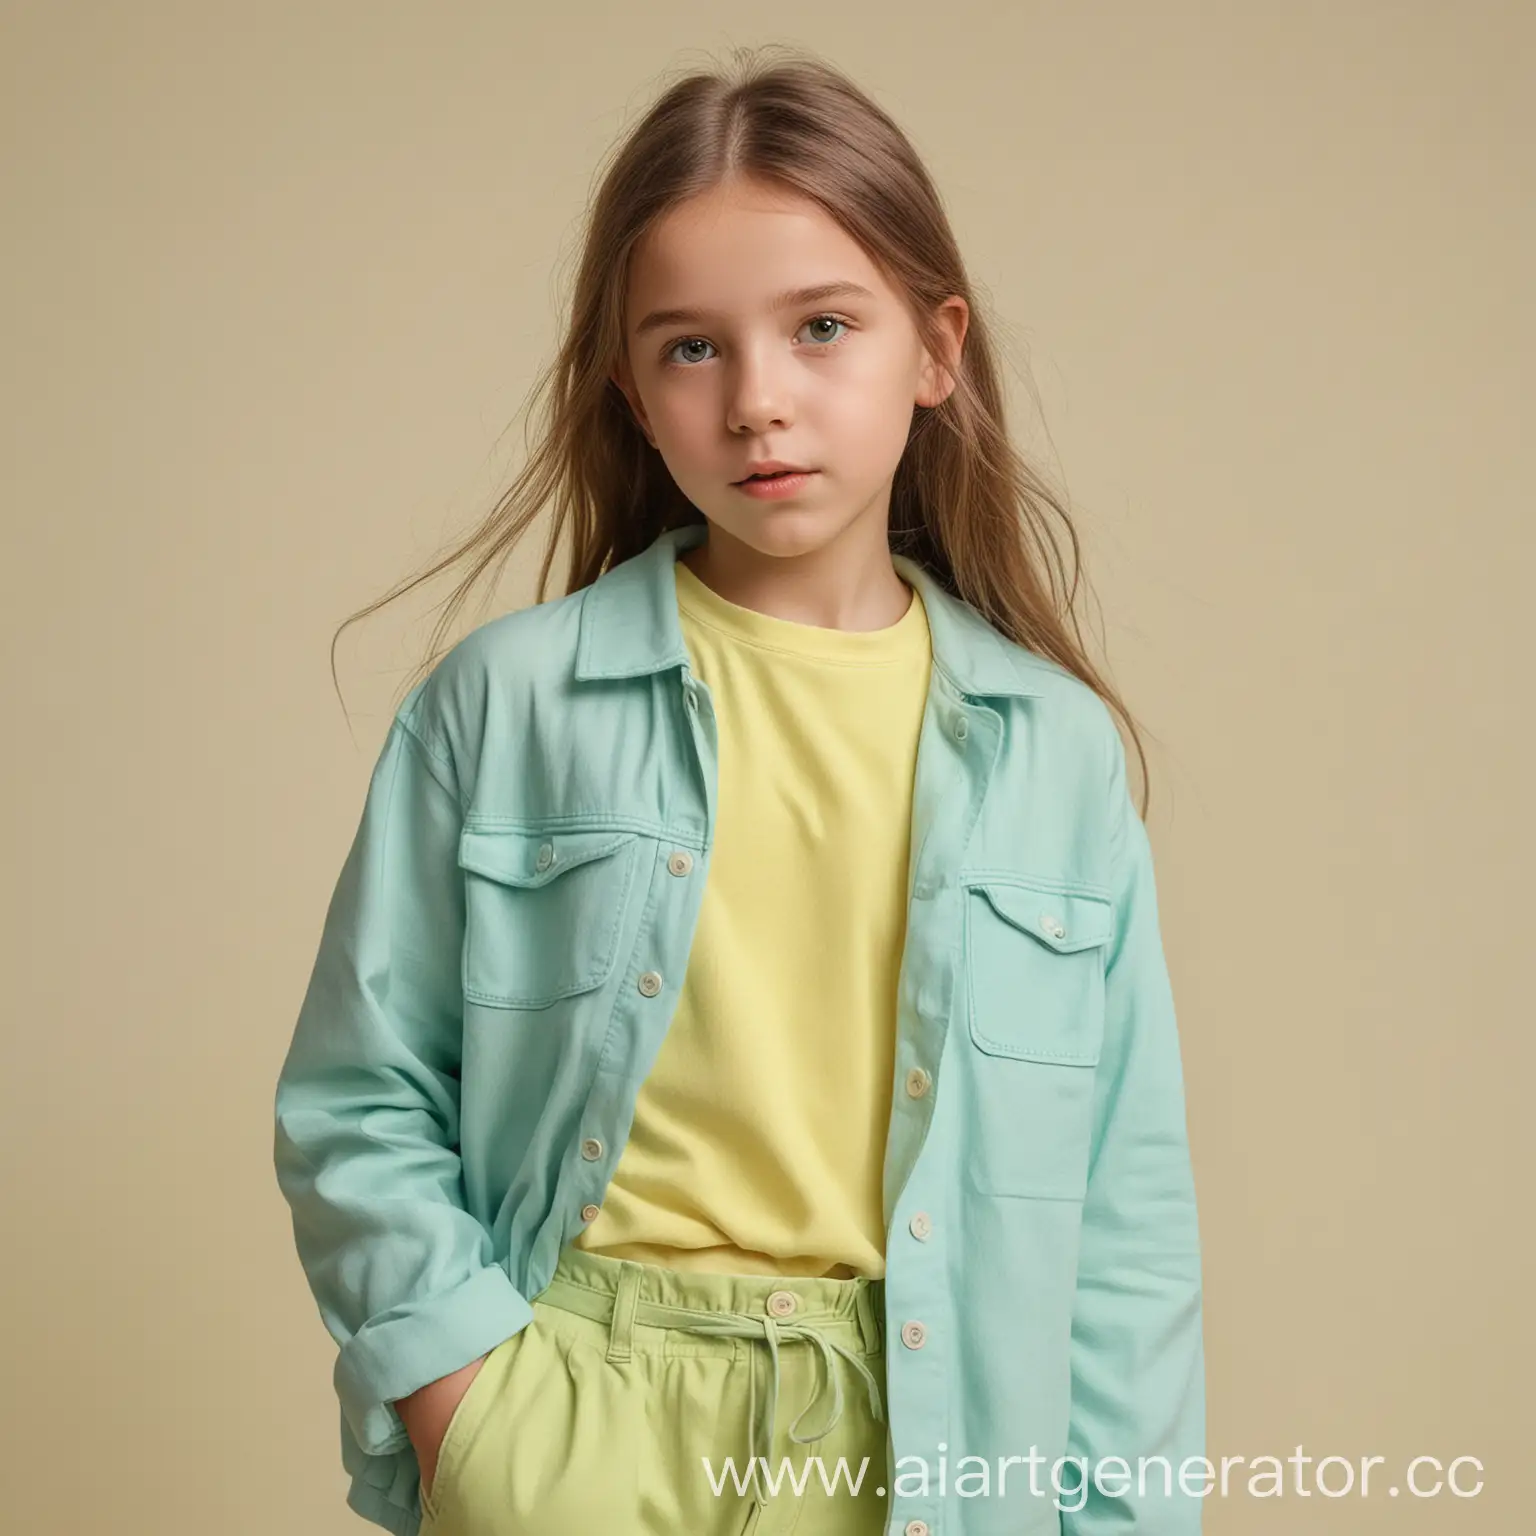 Girl-in-Pastel-Colored-Clothing-Serene-Portrait-of-a-Young-Woman-in-Soft-Hues